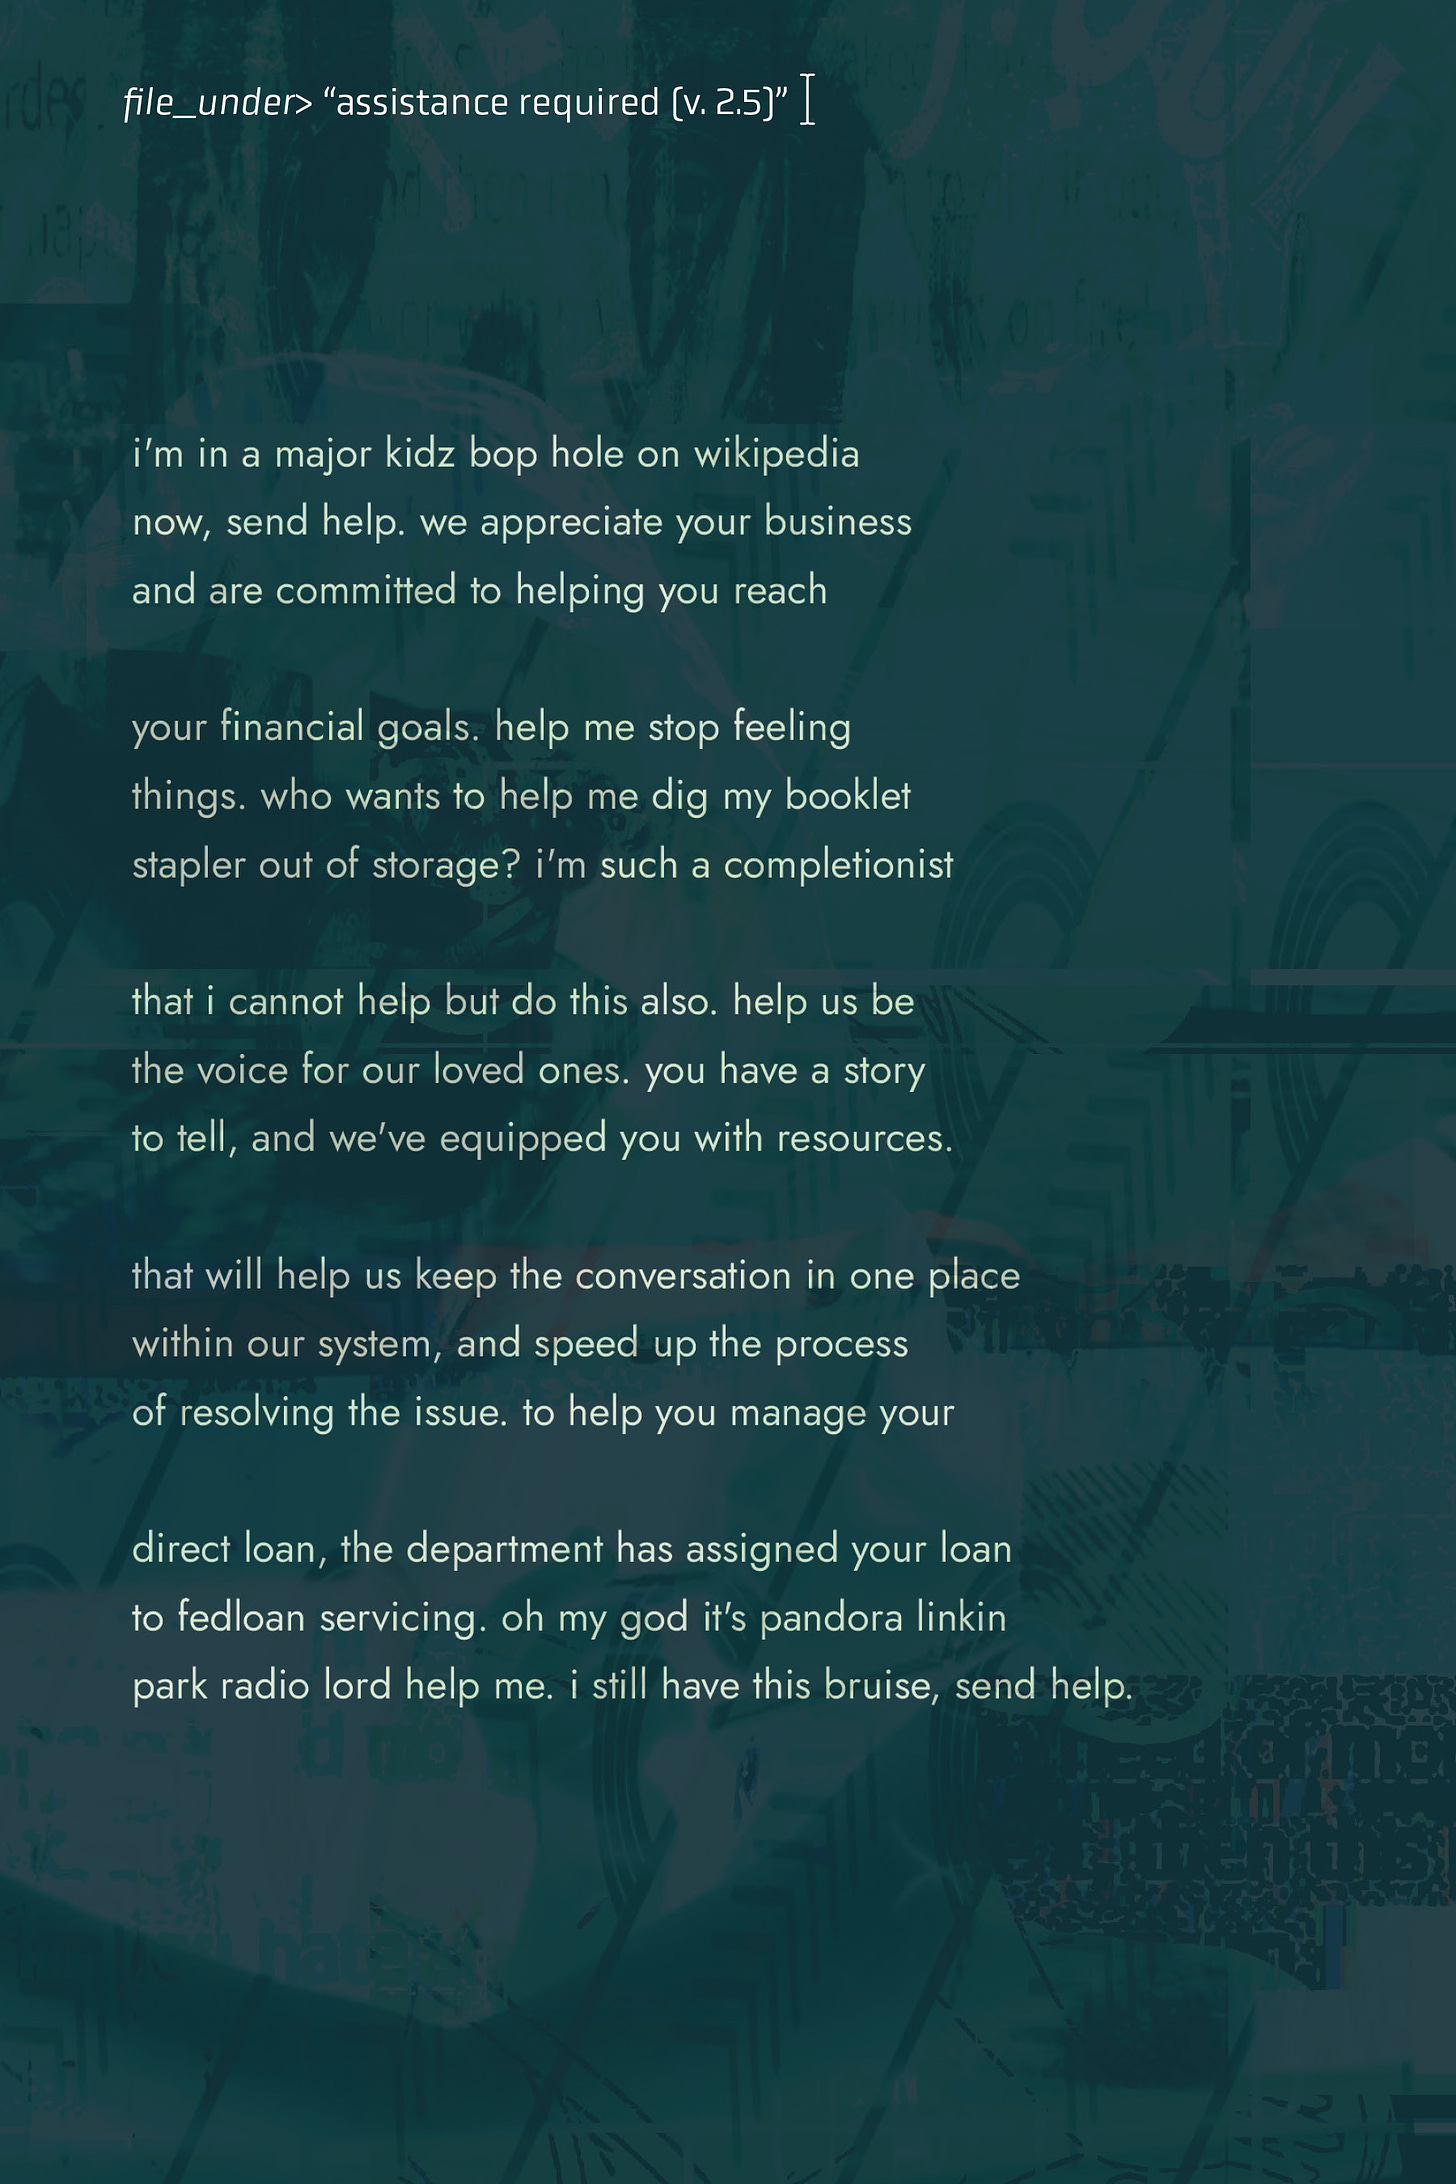 The background of the piece is a dark green digital collage of various elements that are clearly photographic, but layered over each other in a way that it's difficult to discern exactly what the images are. Dark text in the top right corner reads: "filed_under>’assistance required (v. 2.5).’” The poem below reads “i'm in a major kidz bop hole on wikipedia / now, send help. we appreciate your business / and are committed to helping you reach // your financial goals. help me stop feeling / things. who wants to help me dig my booklet / stapler out of storage? i'm such a completionist // that i cannot help but do this also. help us be / the voice for our loved ones. you have a story / to tell, and we've equipped you with resources. // that will help us keep the conversation in one place / within our system, and speed up the process / of resolving the issue. to help you manage your // direct loan, the department has assigned your loan / to fedloan servicing. oh my god it's pandora linkin / park radio lord help me. i still have this bruise, send help.”